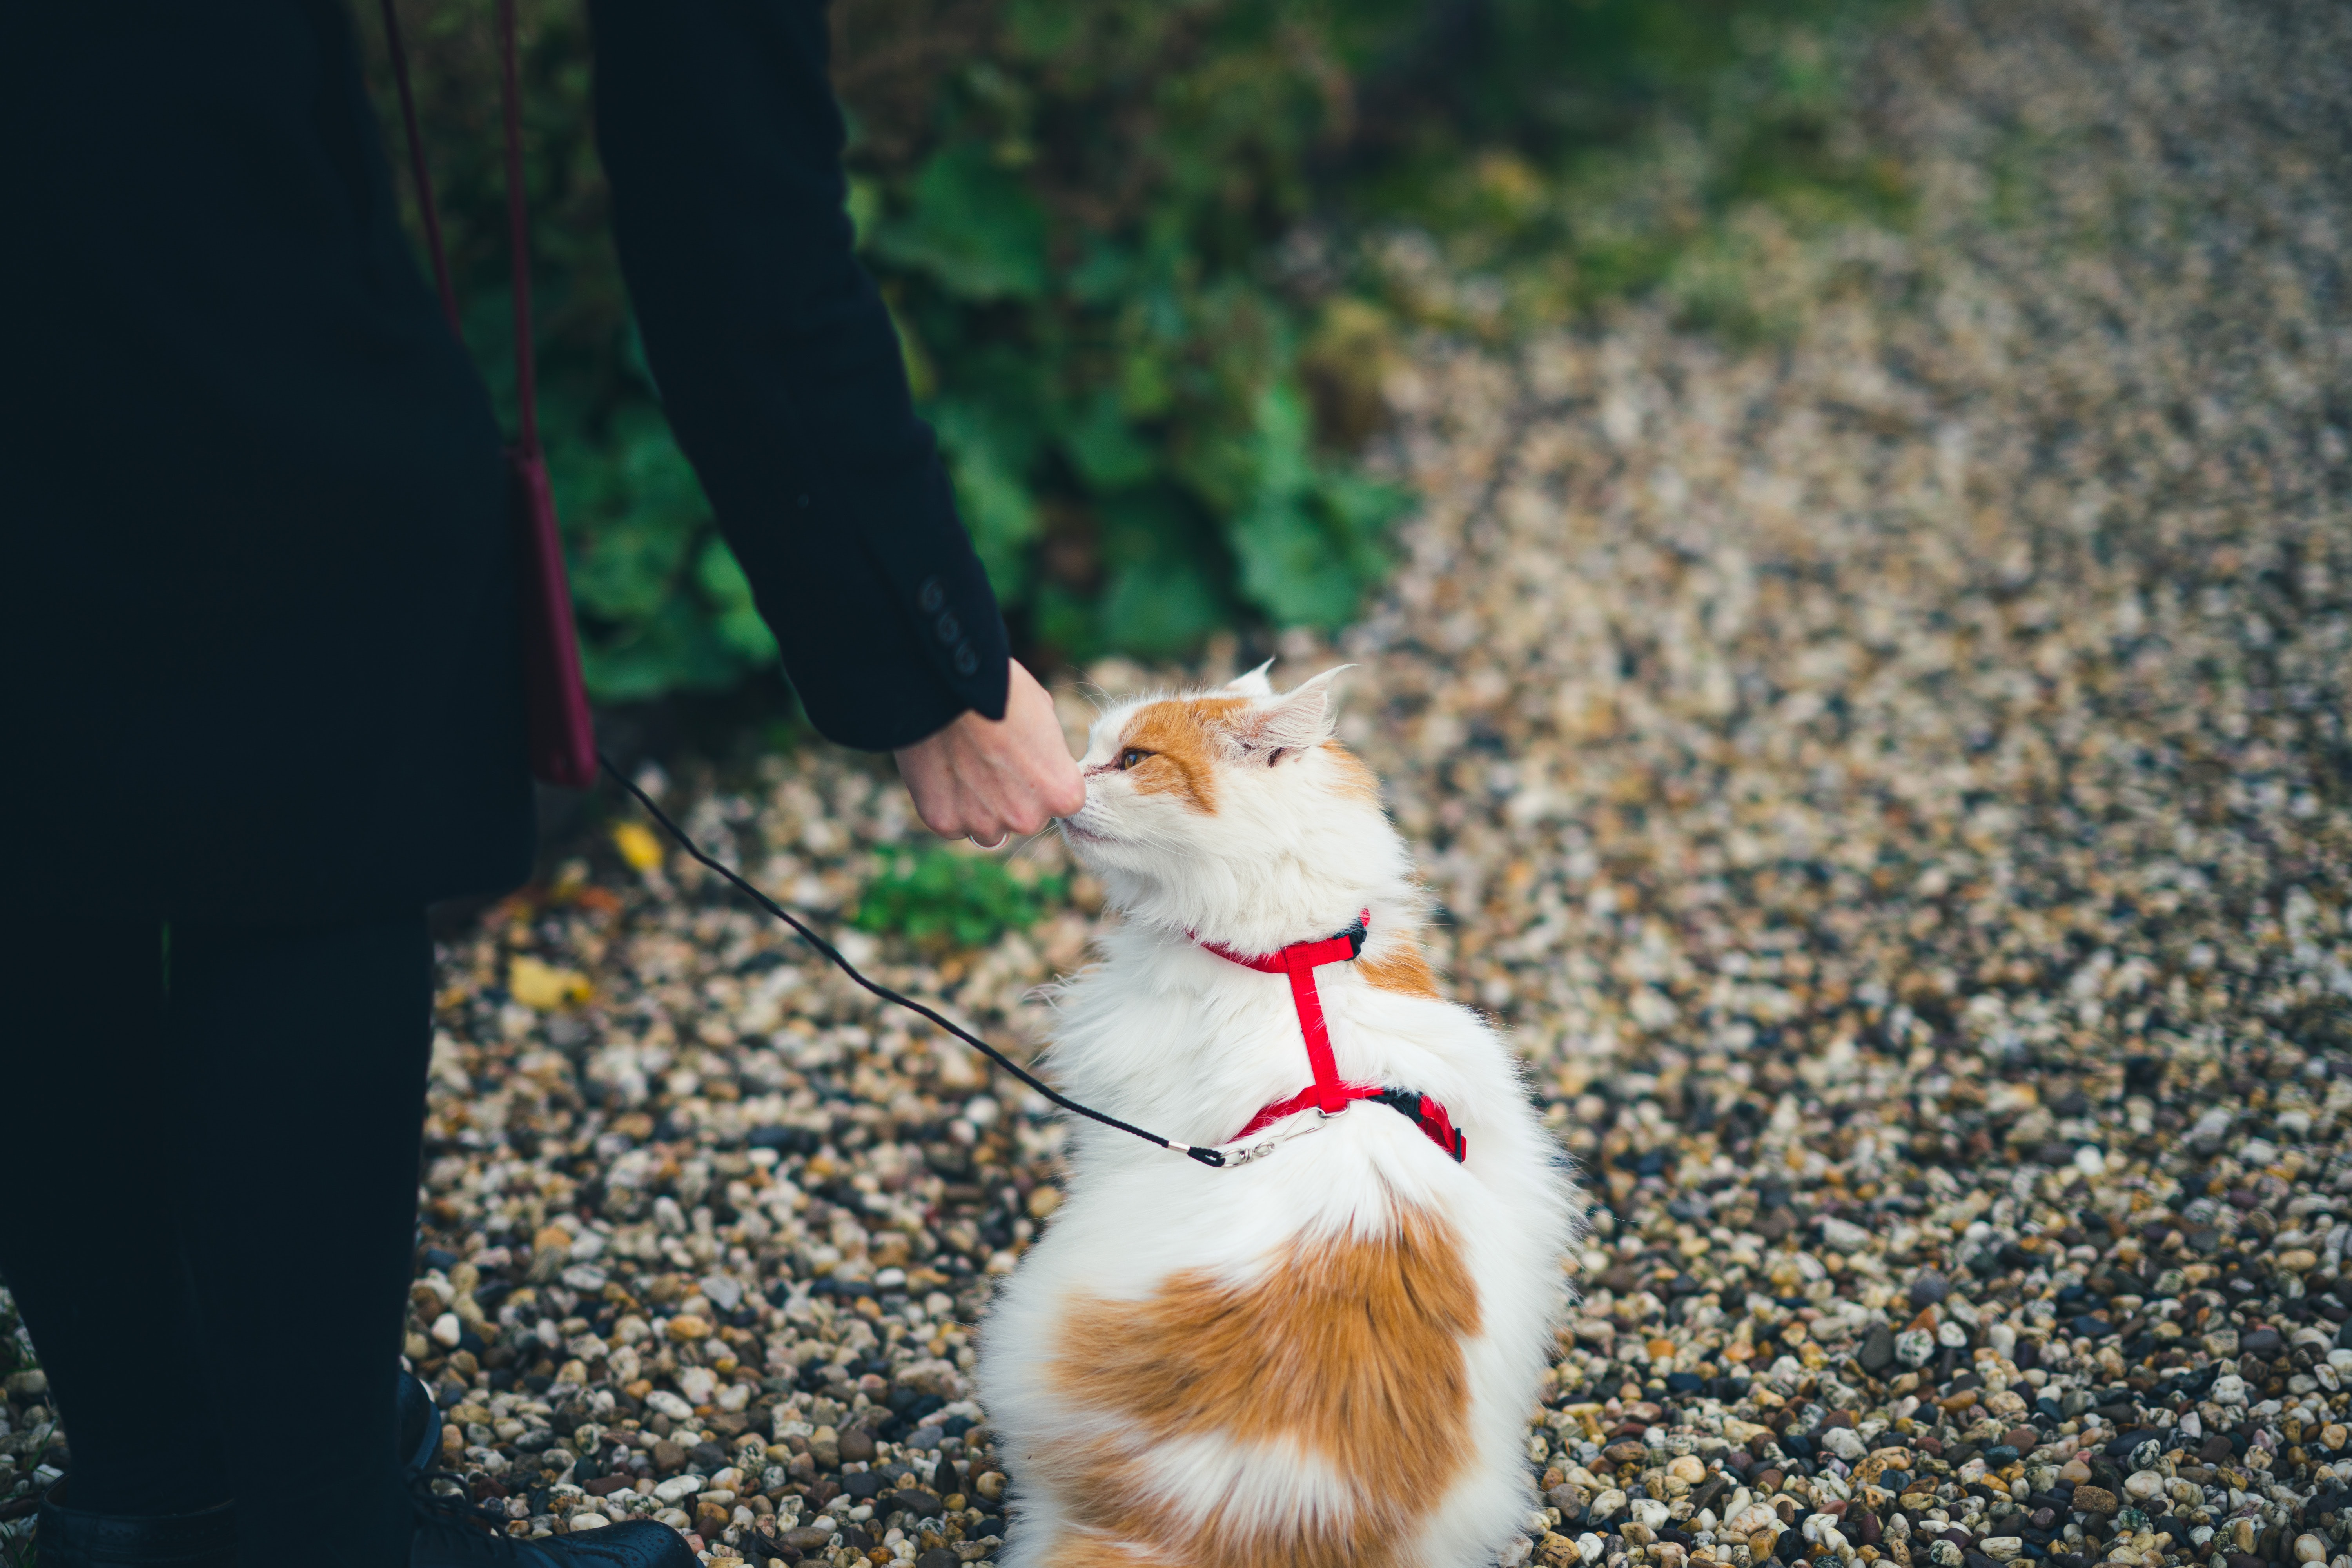 a white and orange long haired cat in a red harness on a leash sniffing a human's hand